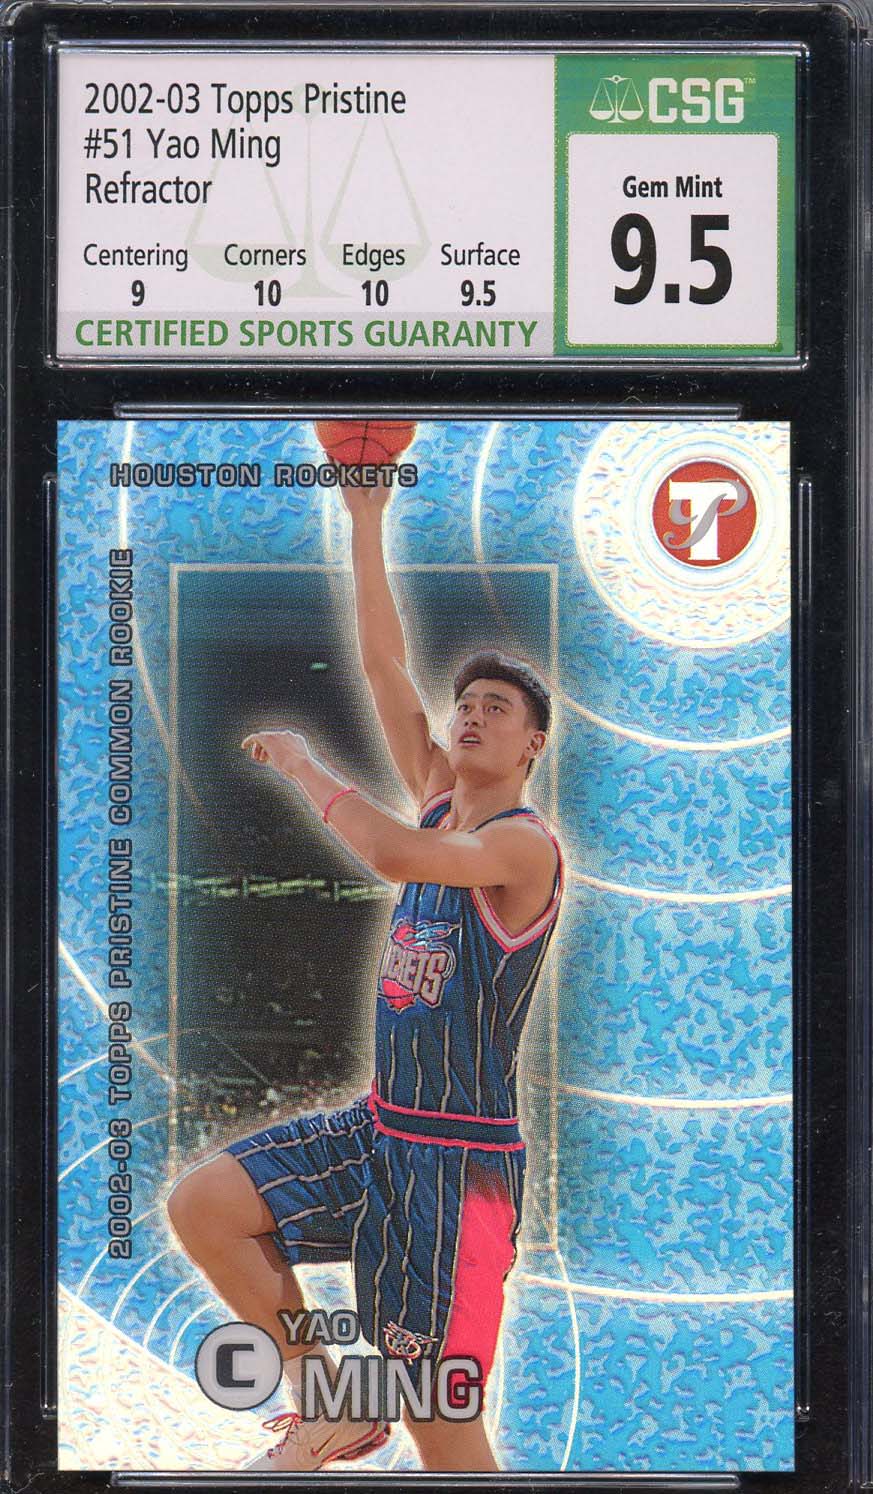 Yao Ming 2002 Topps Pristine Refractor Basketball Rookie Card #51 CSG